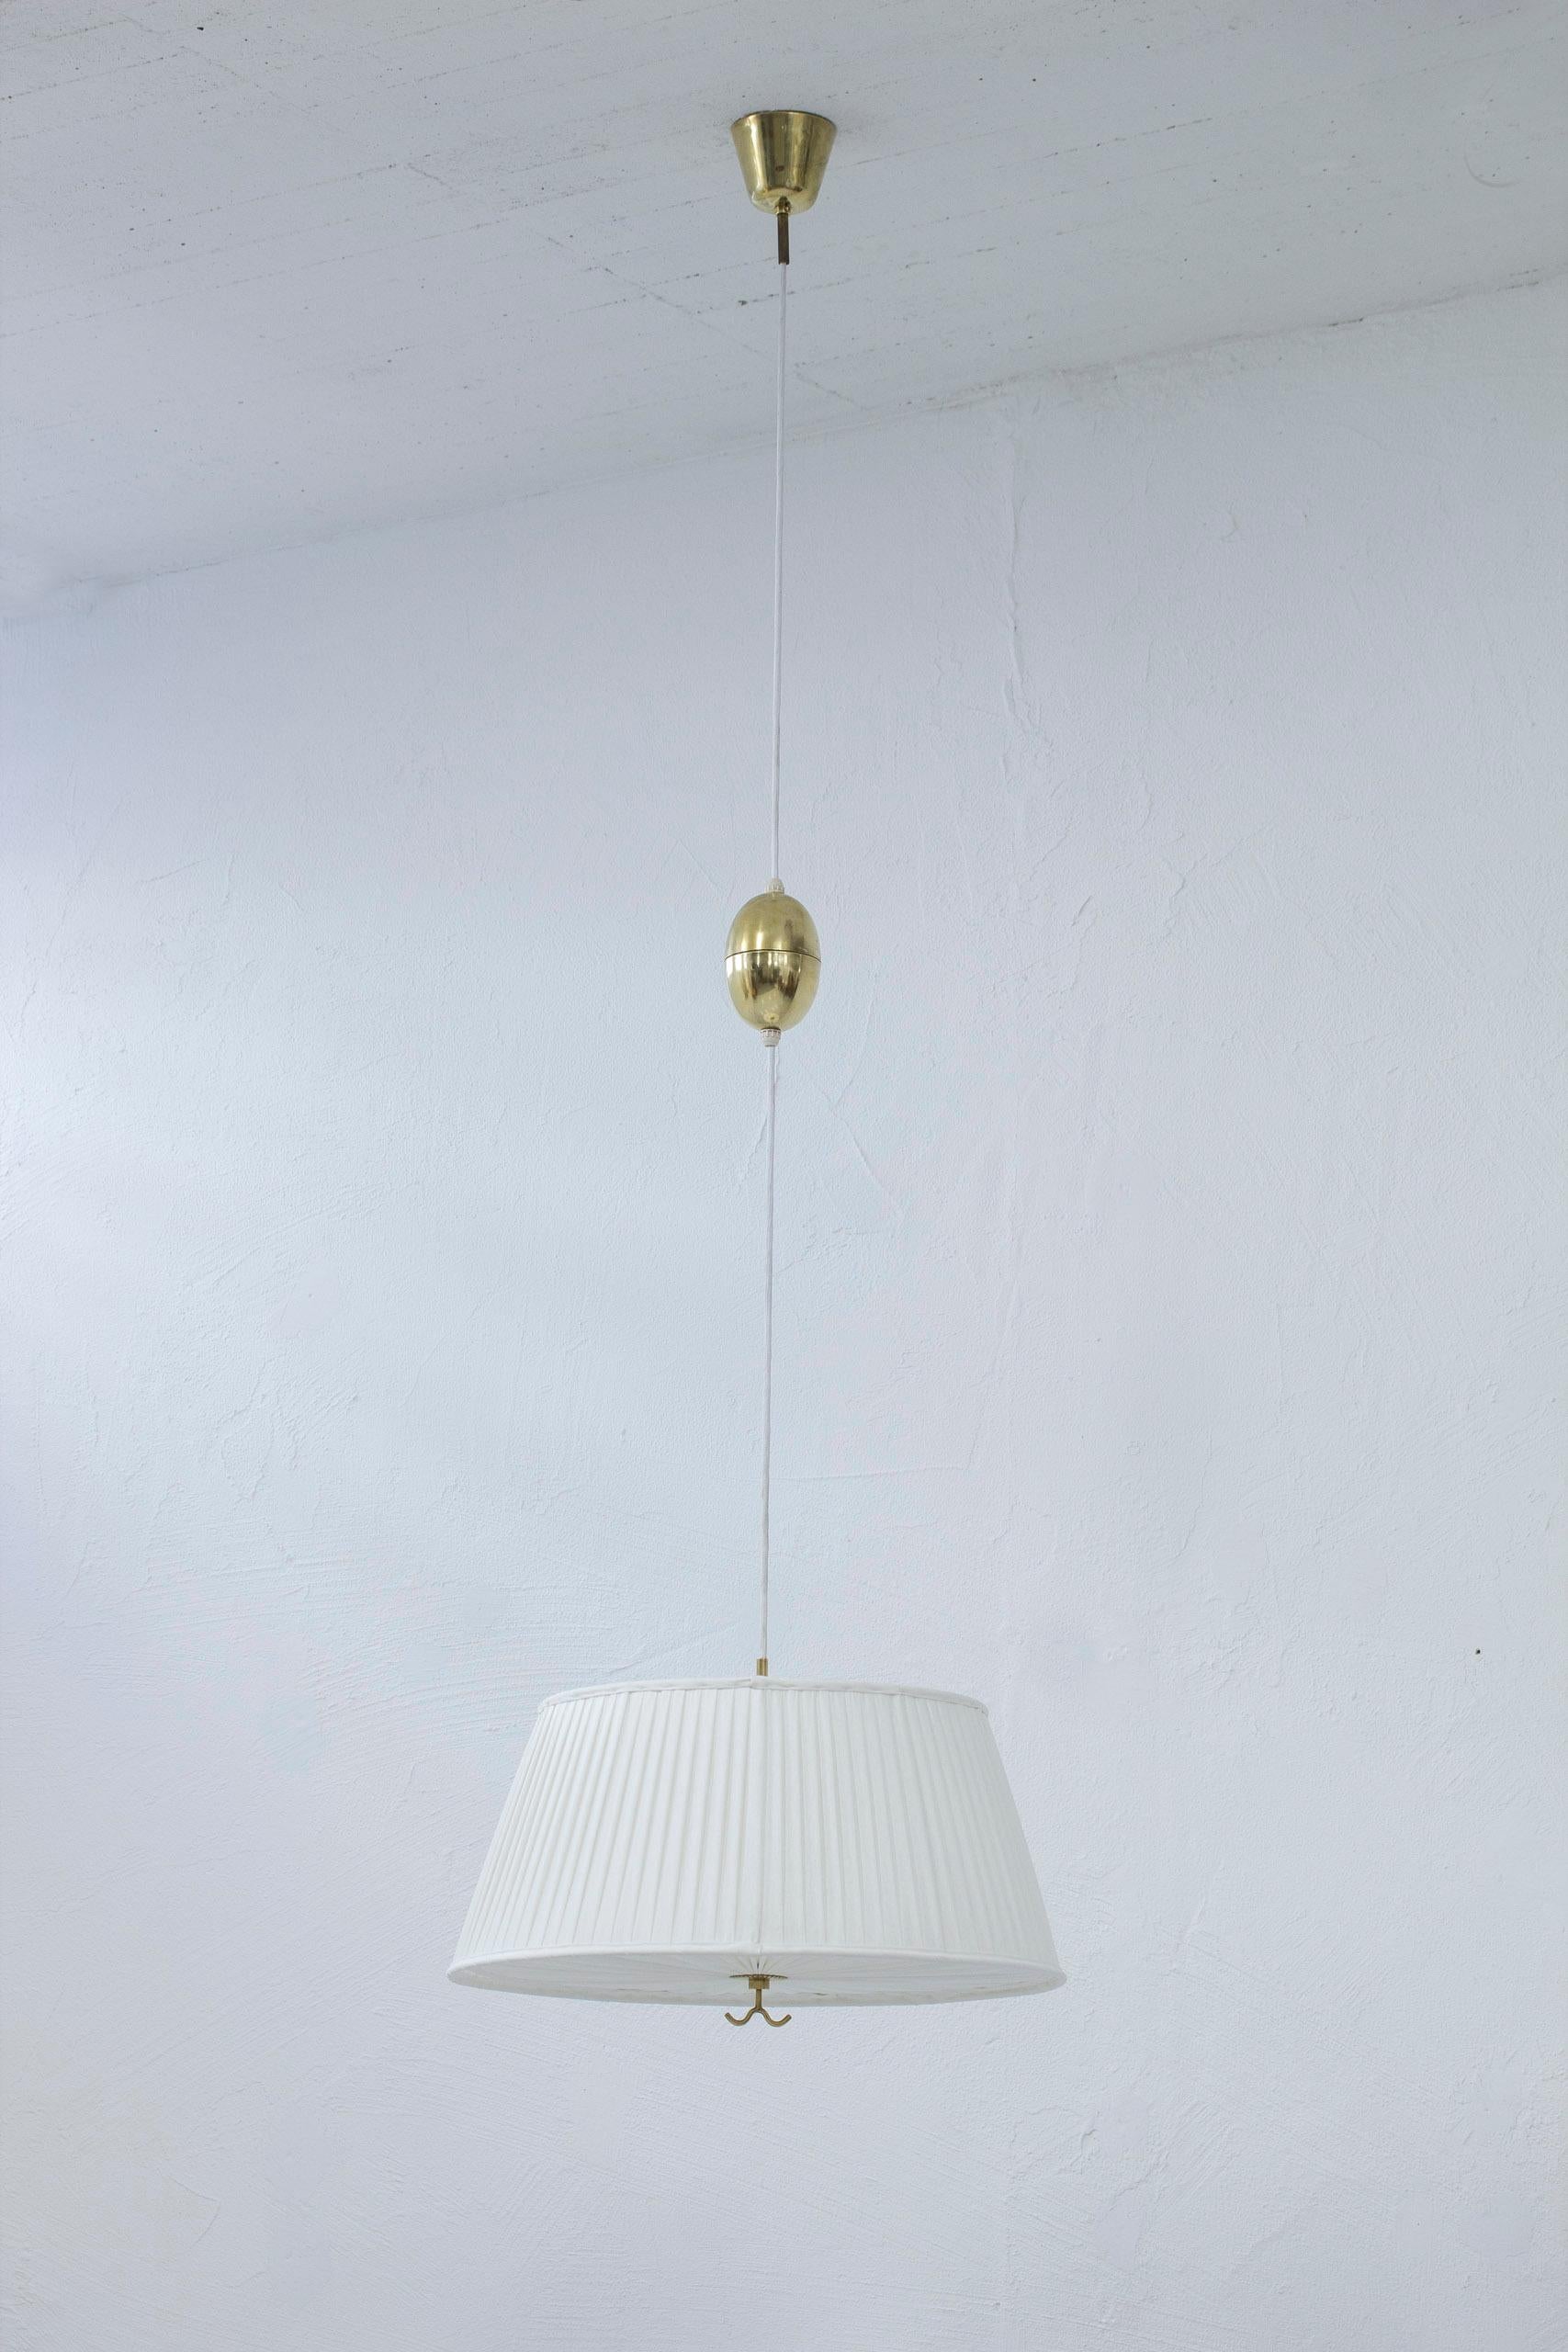 Ceiling lamp model 11558 designed by Harald Notini. Produced in Sweden by Böhlmarks during the 1940s. Ceiling mount, pulley and handle made from brass and shade in hand sewn pleated chintz fabric. The lamp shade has been re-sewn with new fabric and